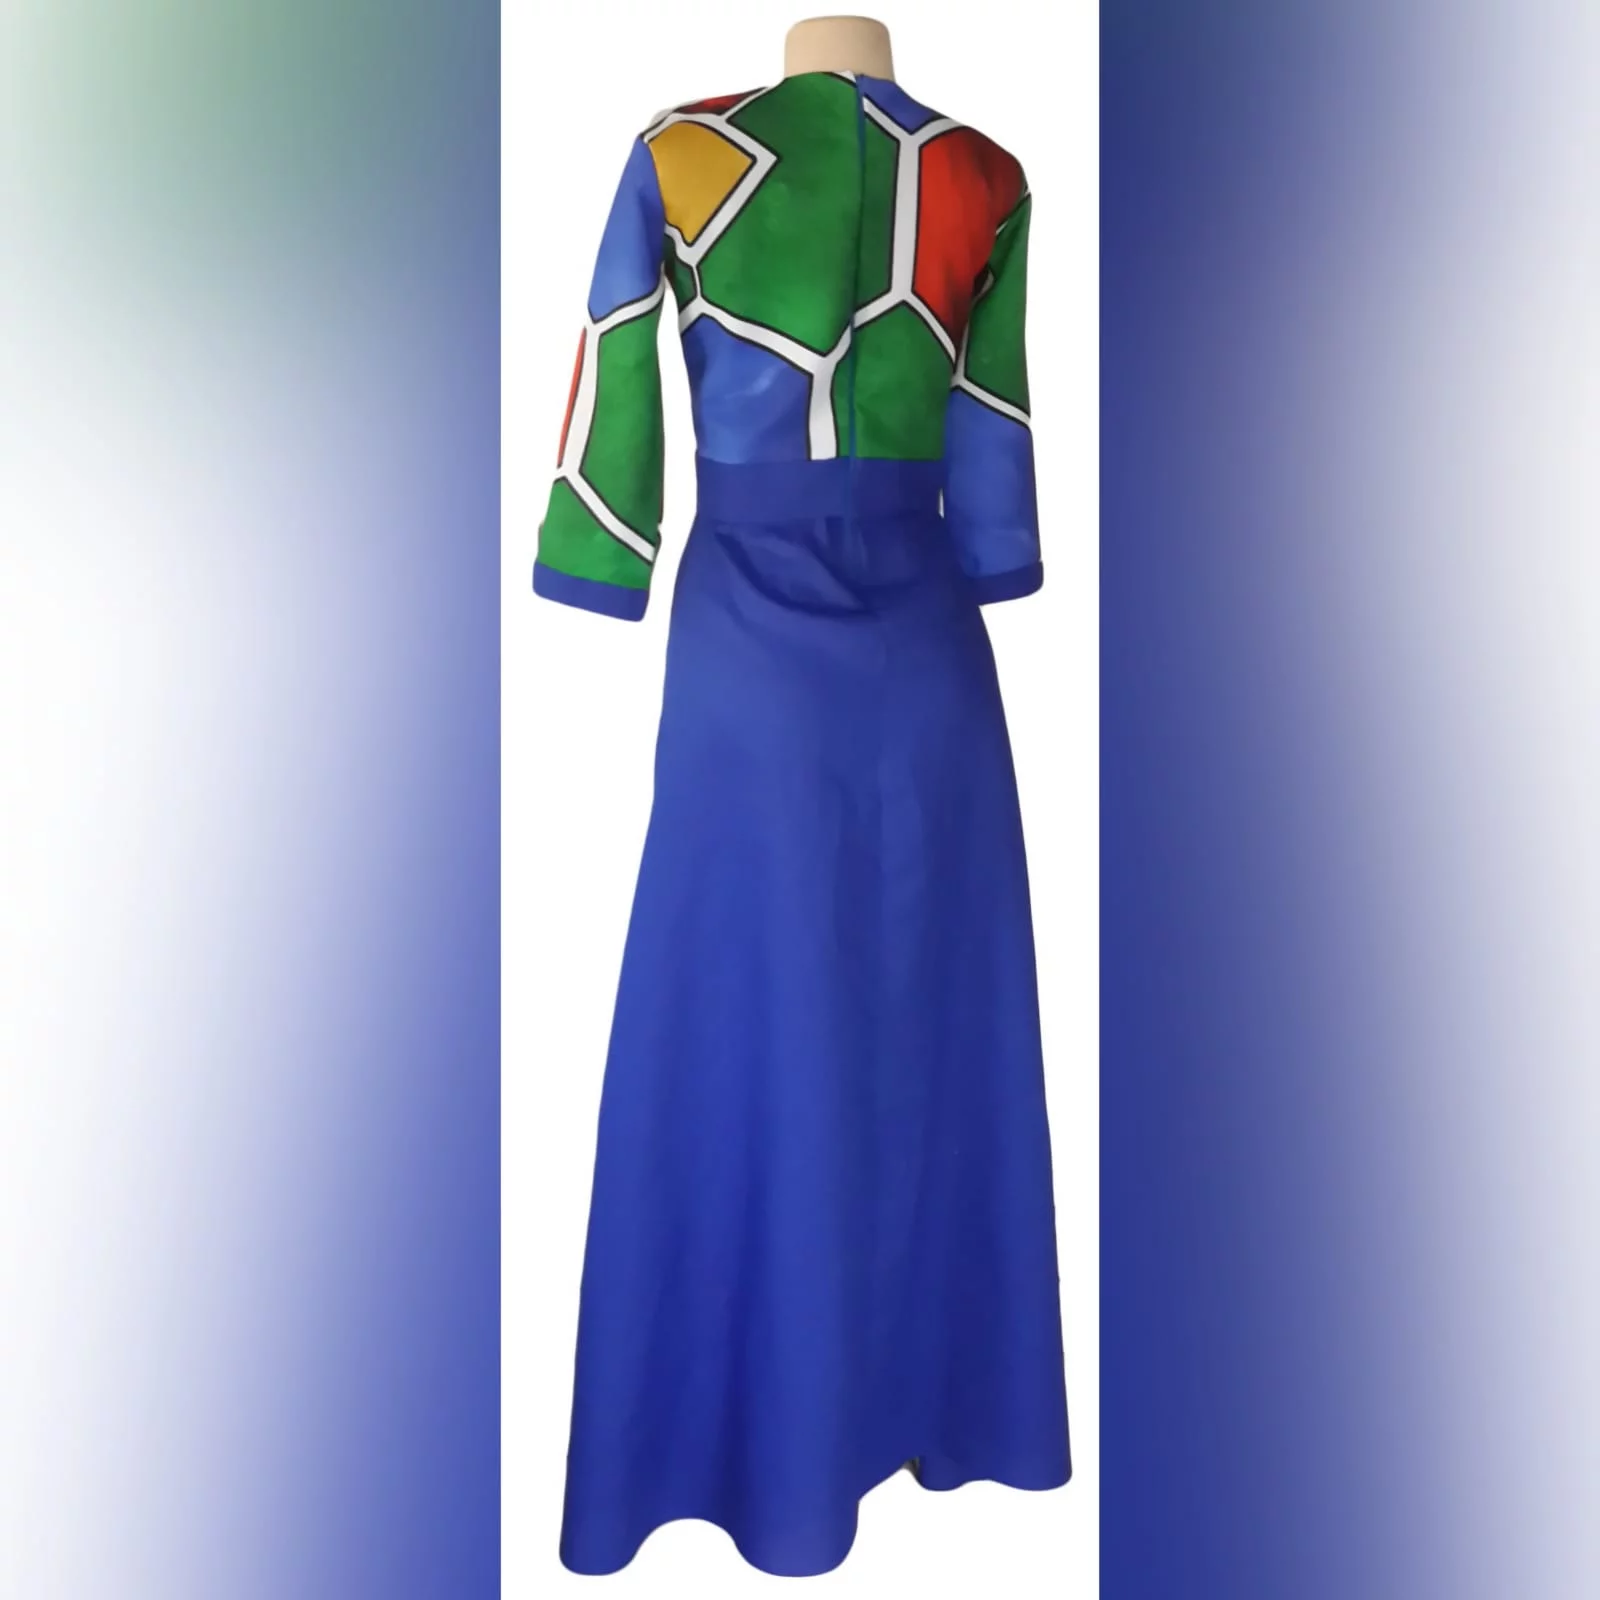 Royal blue ndebele dress and matching ndebele shirt 6 royal blue and ndebele empire fit dress. Bodice with ndebele print and 3/4 sleeves and an under bust belt. Mens matching ndebele shirt in royal blue. Traditional wedding attire.